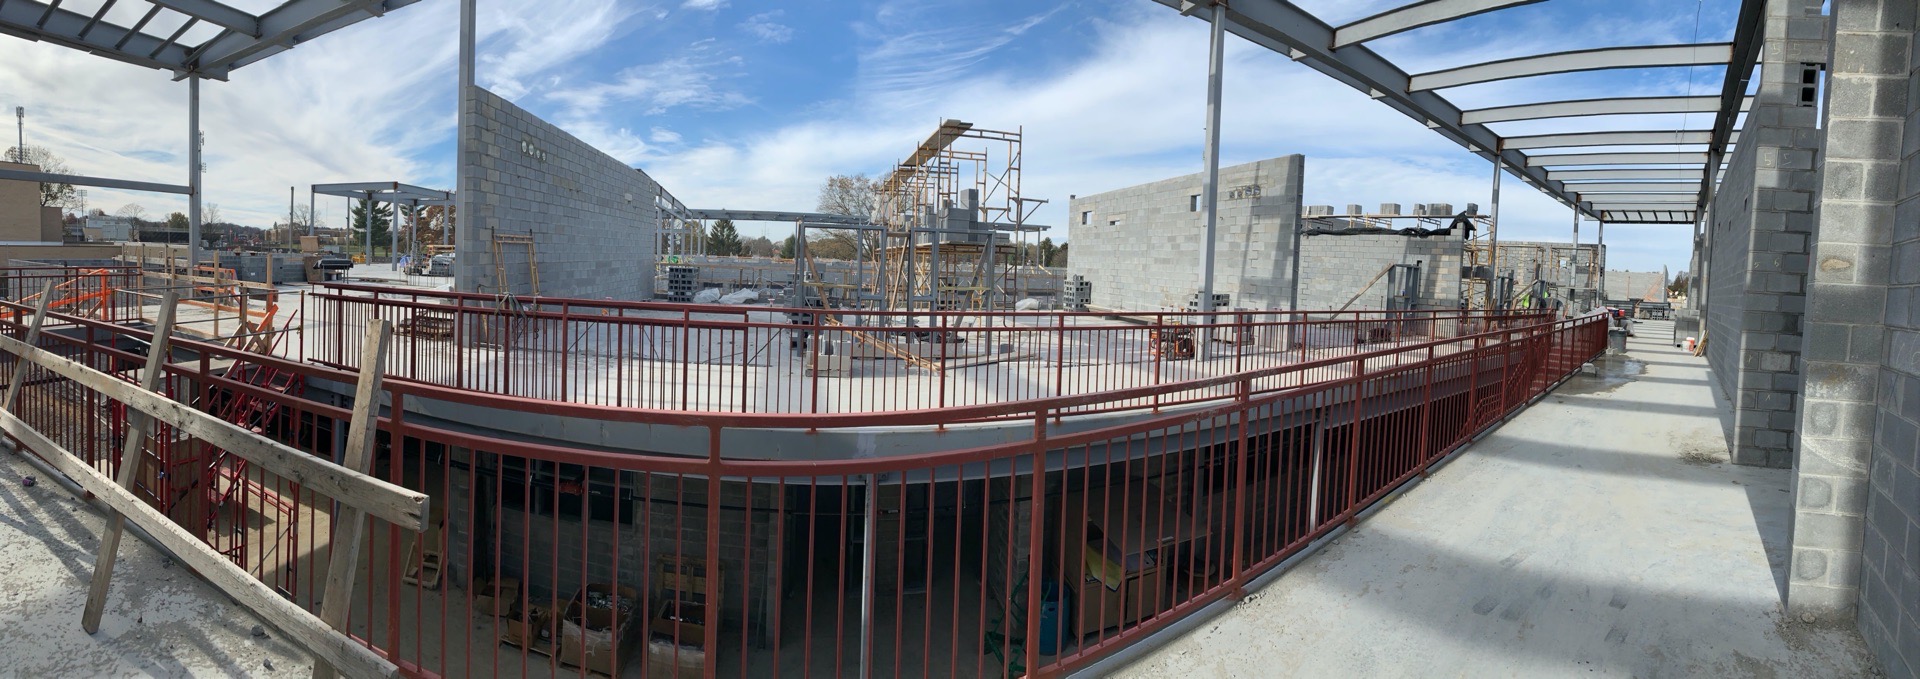 Middle School Construction, 11/18/2019